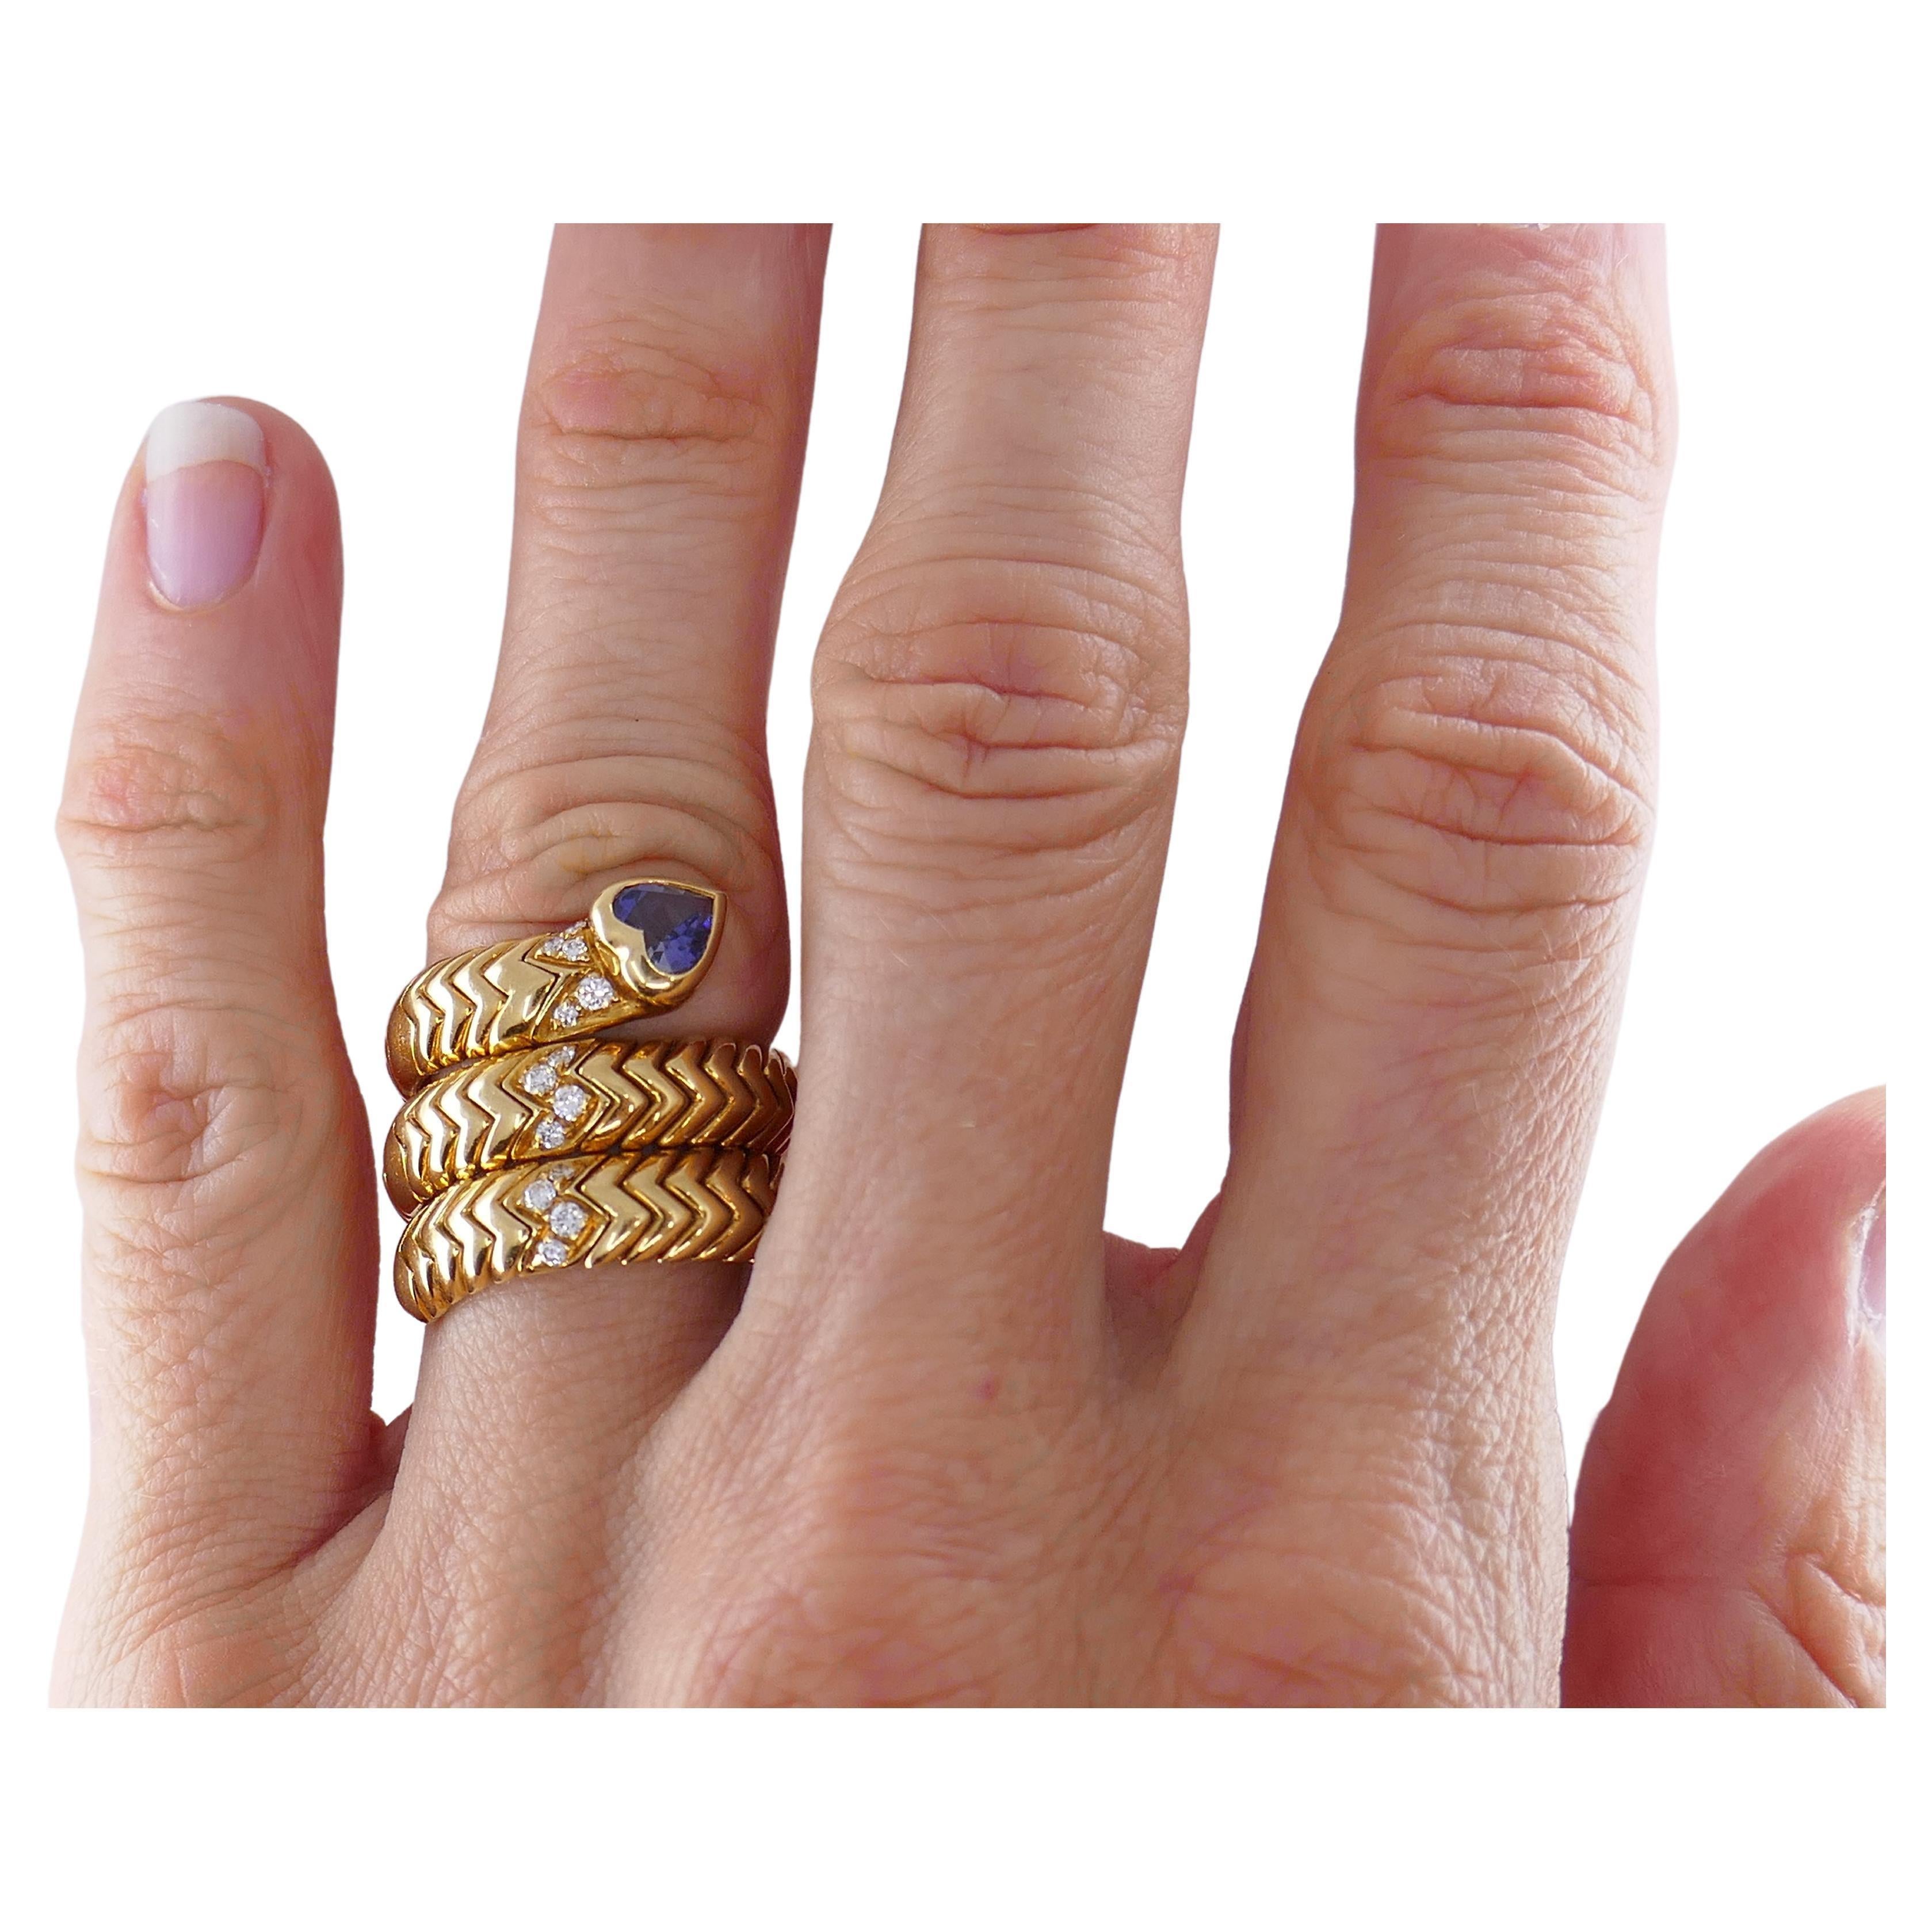 An iconic Bulgari Spiga ring, with diamonds and a heart-shaped sapphire.
A glossy, three rows wrap-around ring with a famous Spiga pattern is simply a perfection. Sparkly diamonds add a pinch of glamour to the look. And a heart-shaped sapphire turns